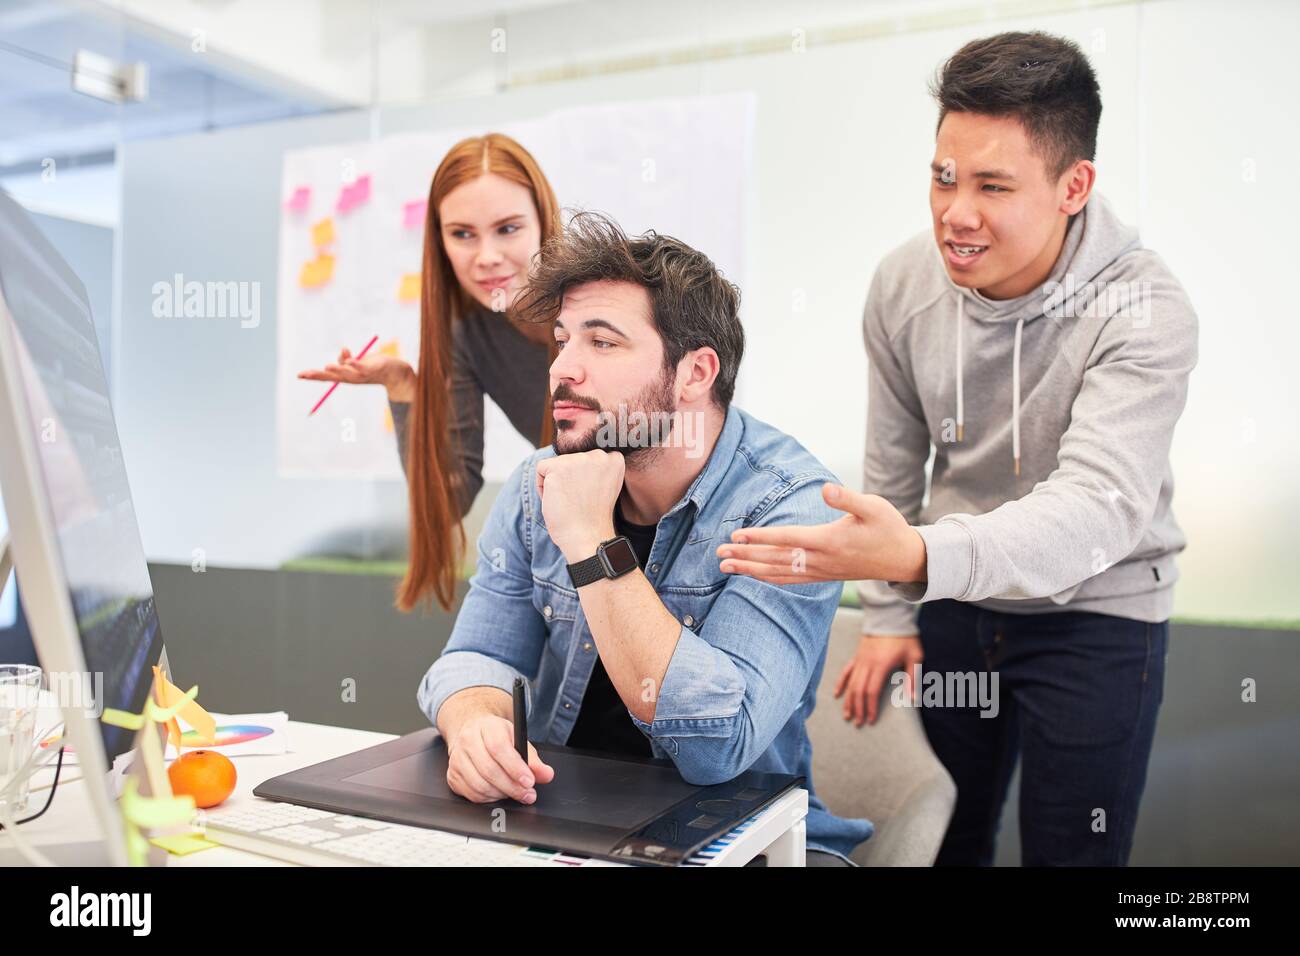 Web designers and graphic designers on the computer discuss a creative solution Stock Photo